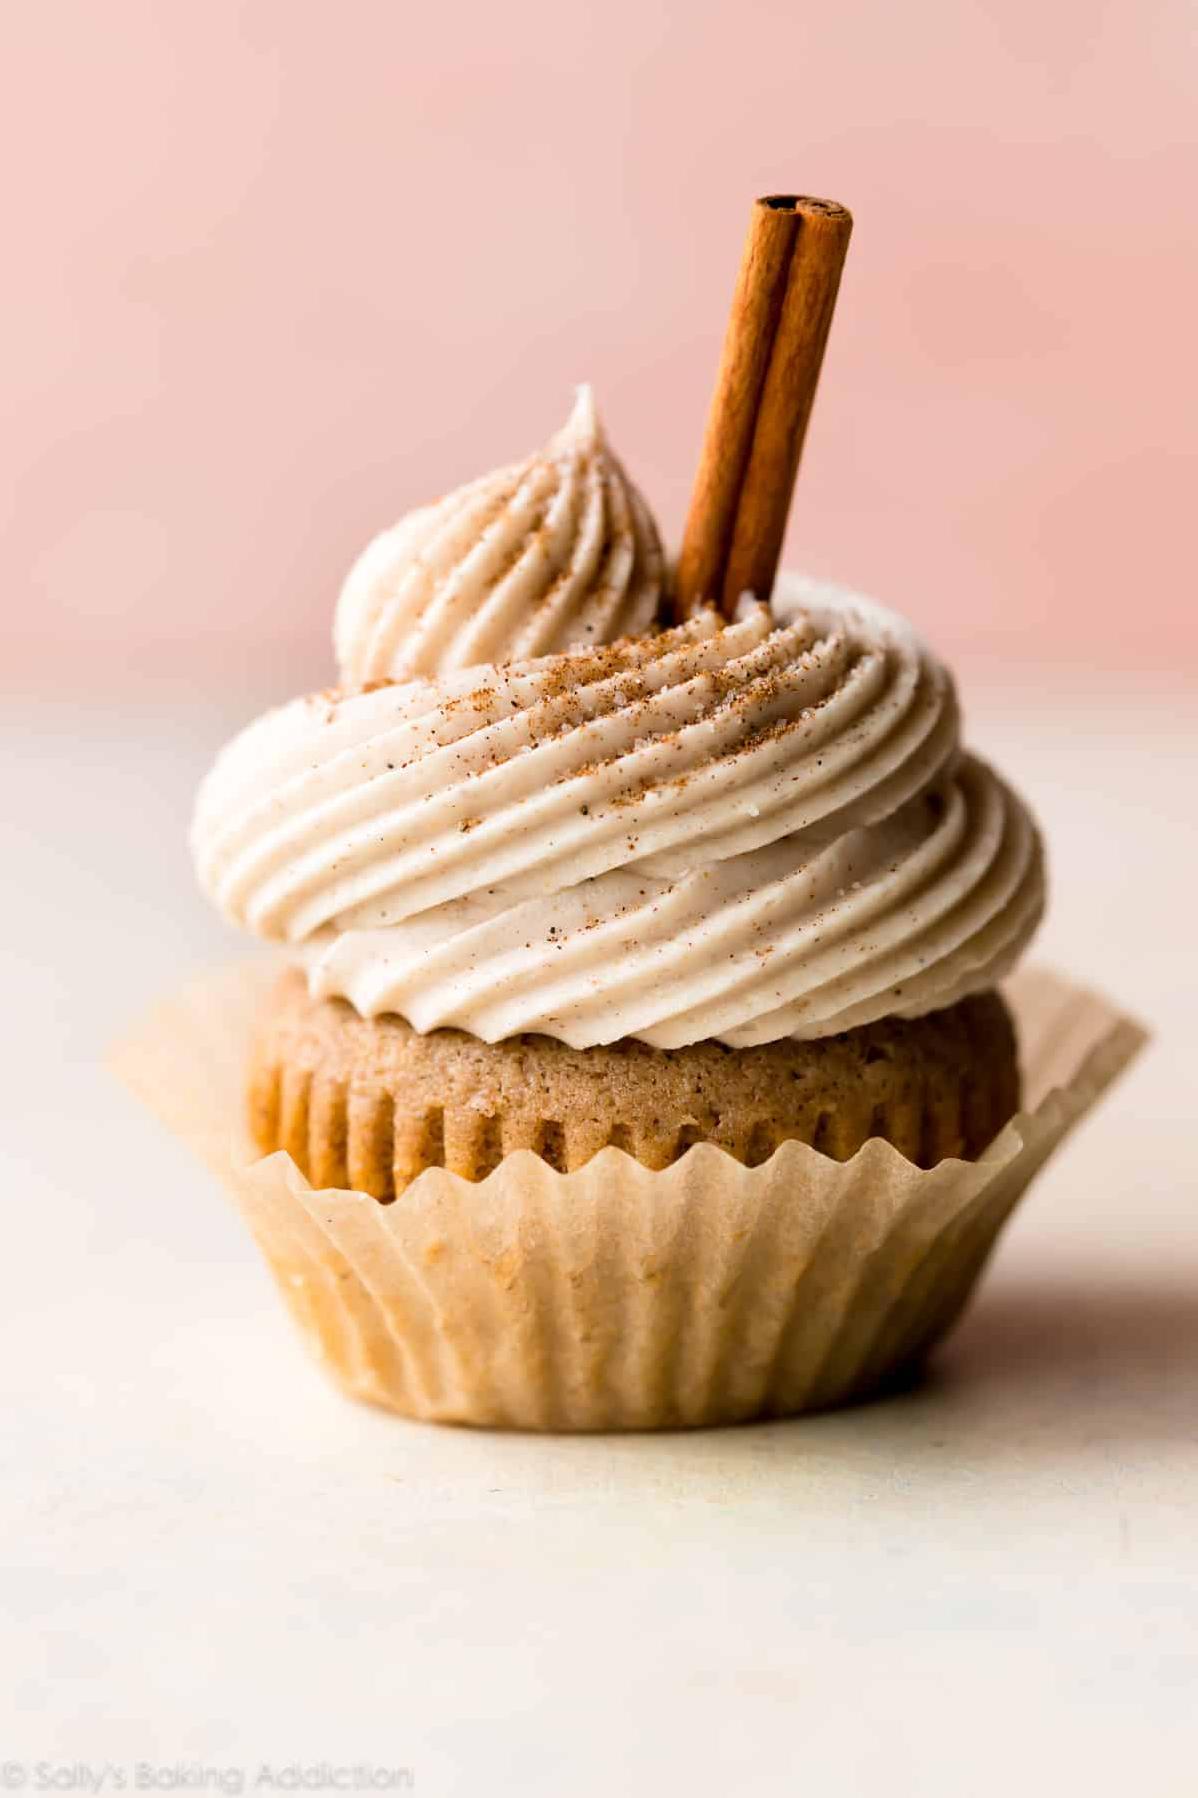  Trust me, these cupcakes are worth the effort - they're a total crowd pleaser!